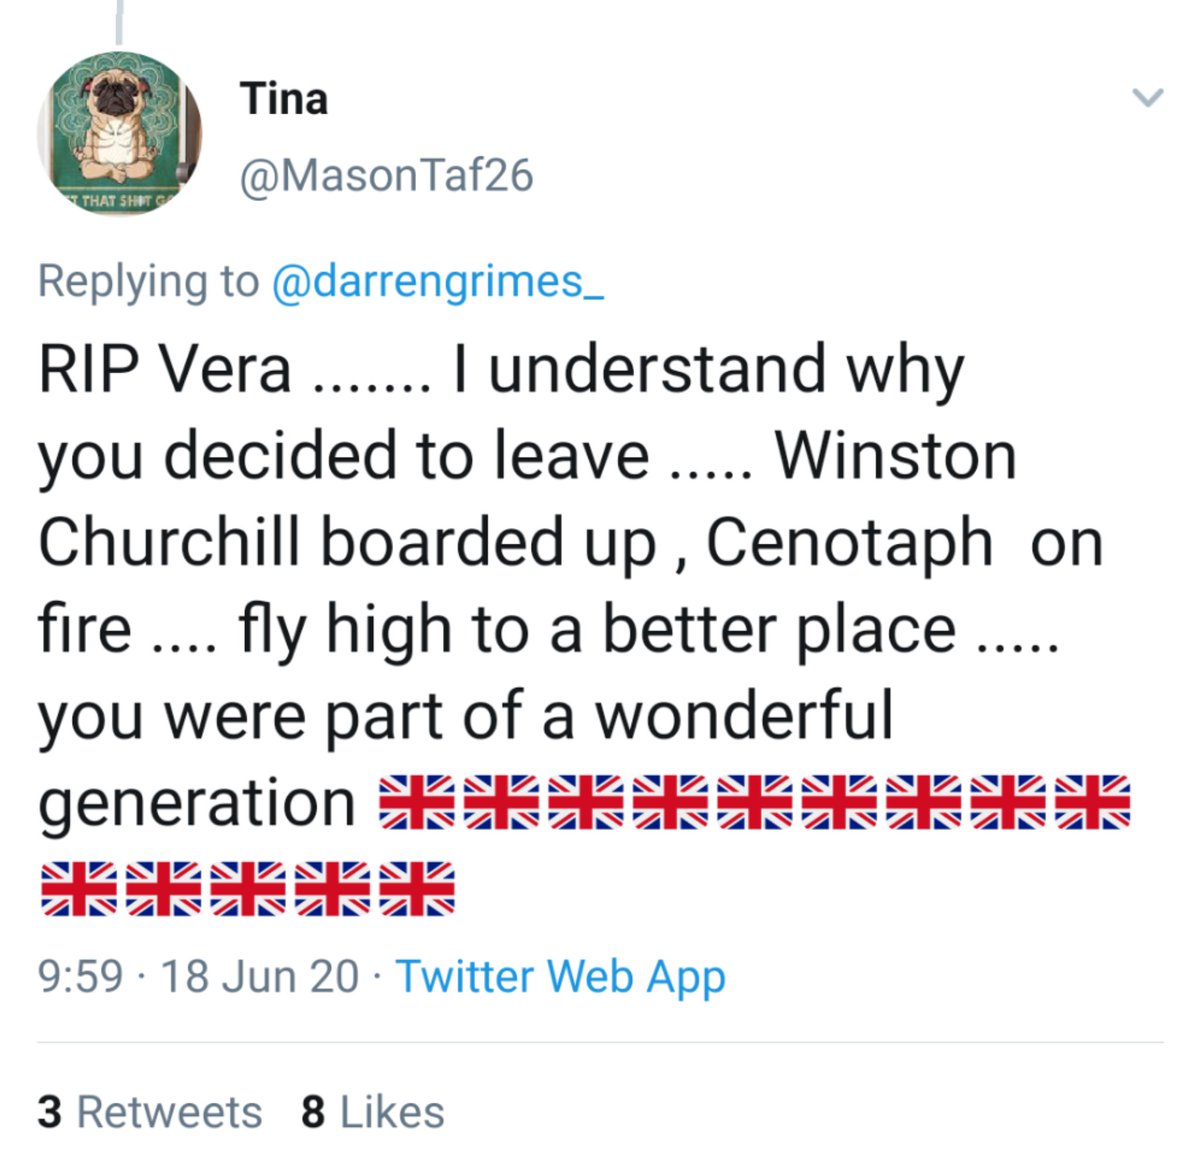 Apparently Vera Lynn chose to die because black people are asking for equality. This country is deeply unwell.